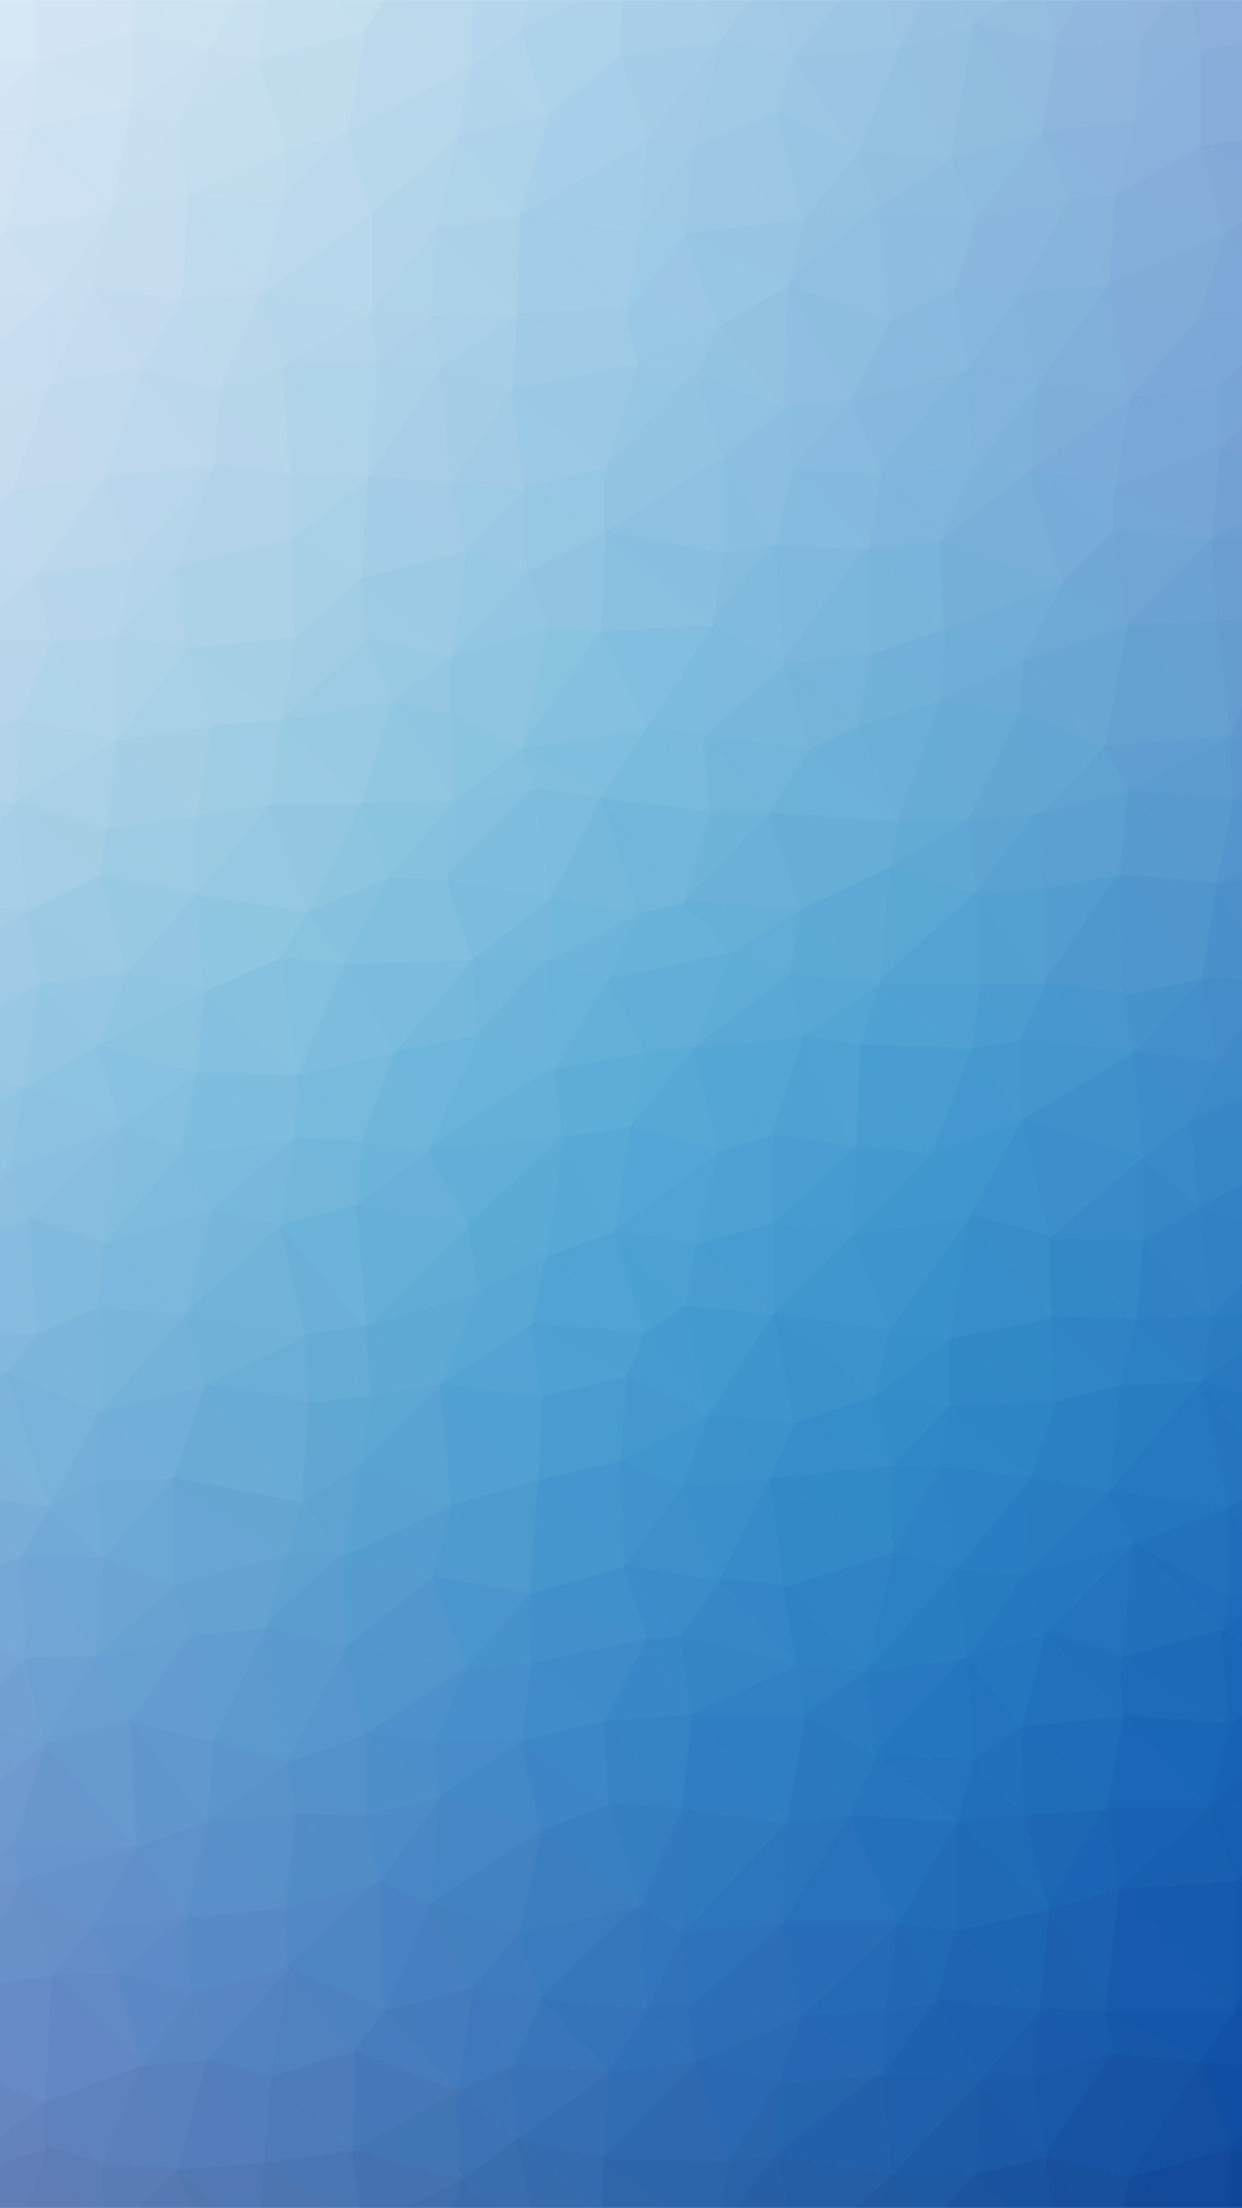 Polygon Art Blue Abstract Pattern Android Wallpaper - HD Wallpaper 